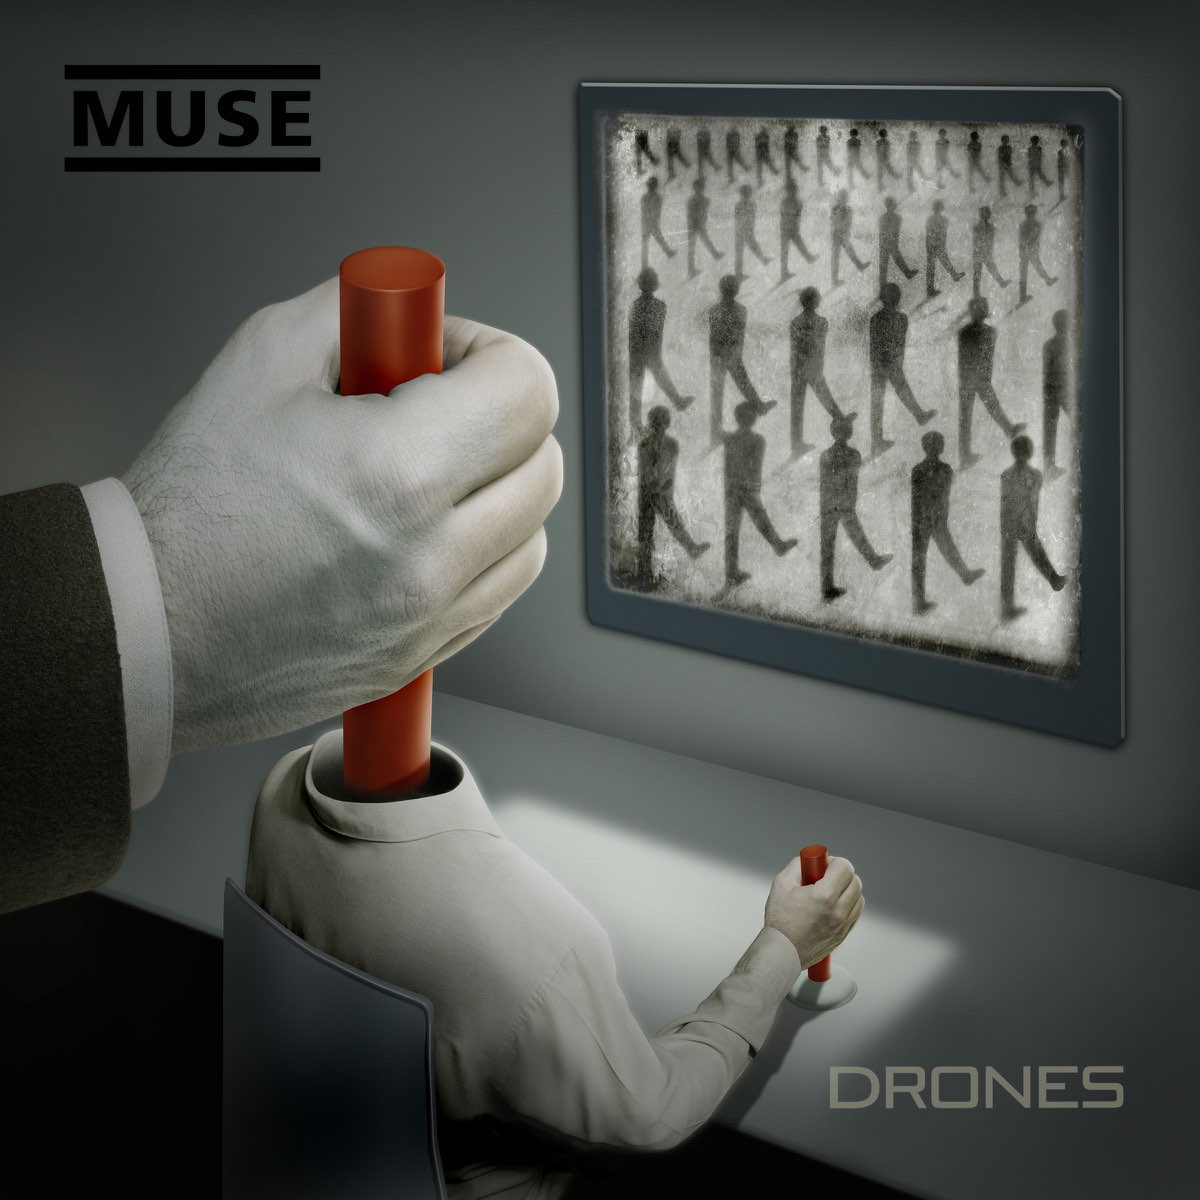 Drones - Album by Muse - Apple Music